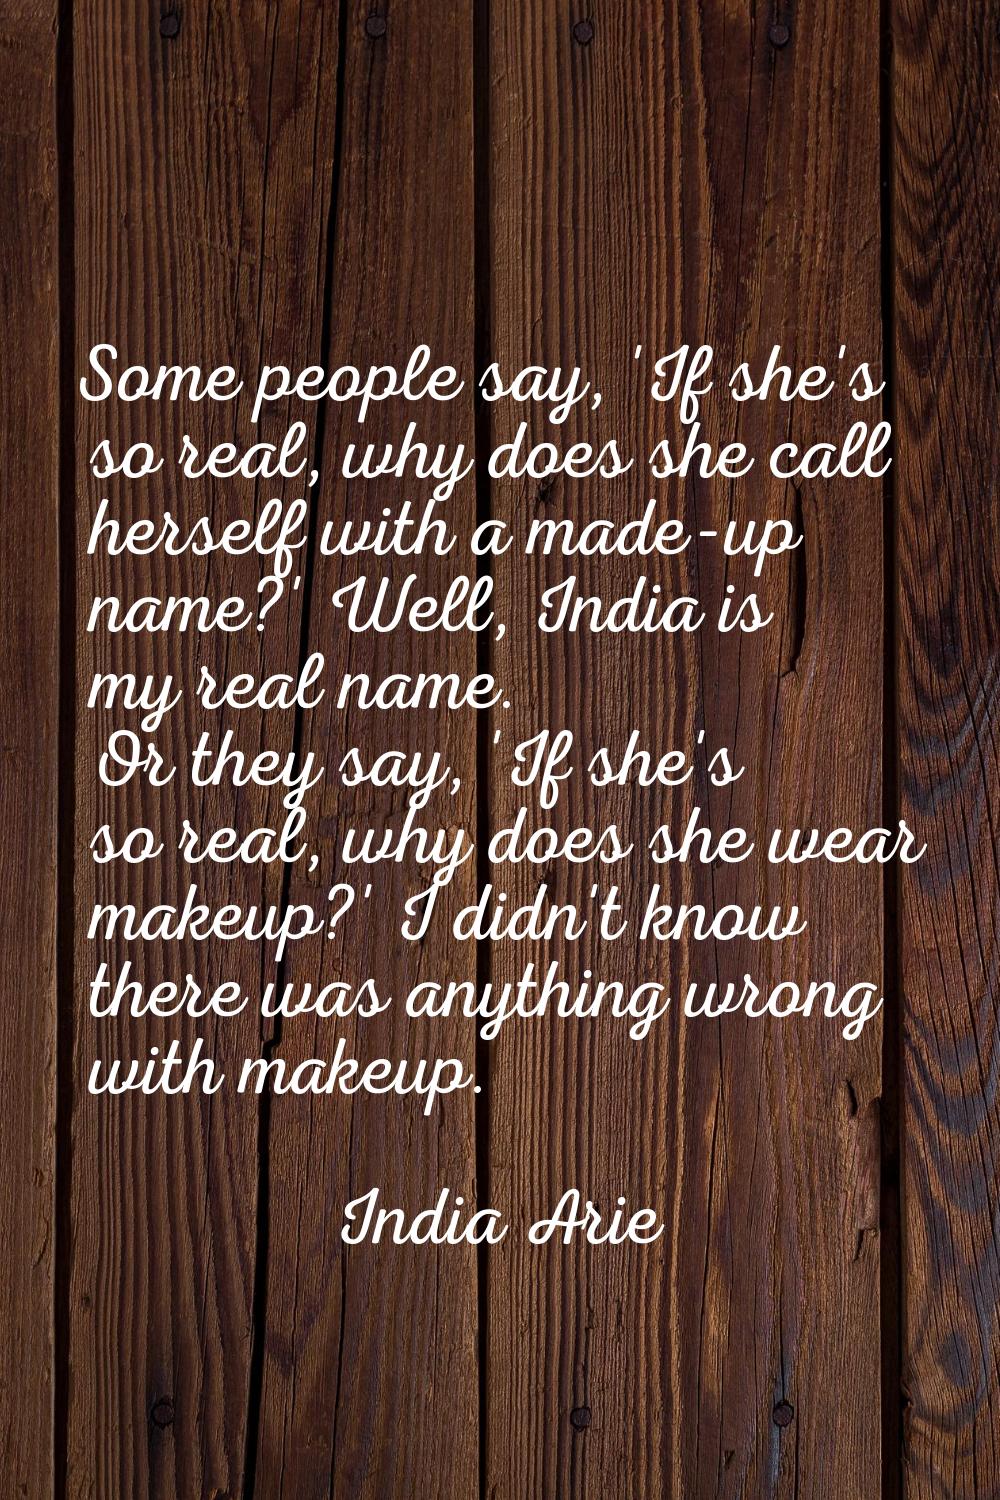 Some people say, 'If she's so real, why does she call herself with a made-up name?' Well, India is 